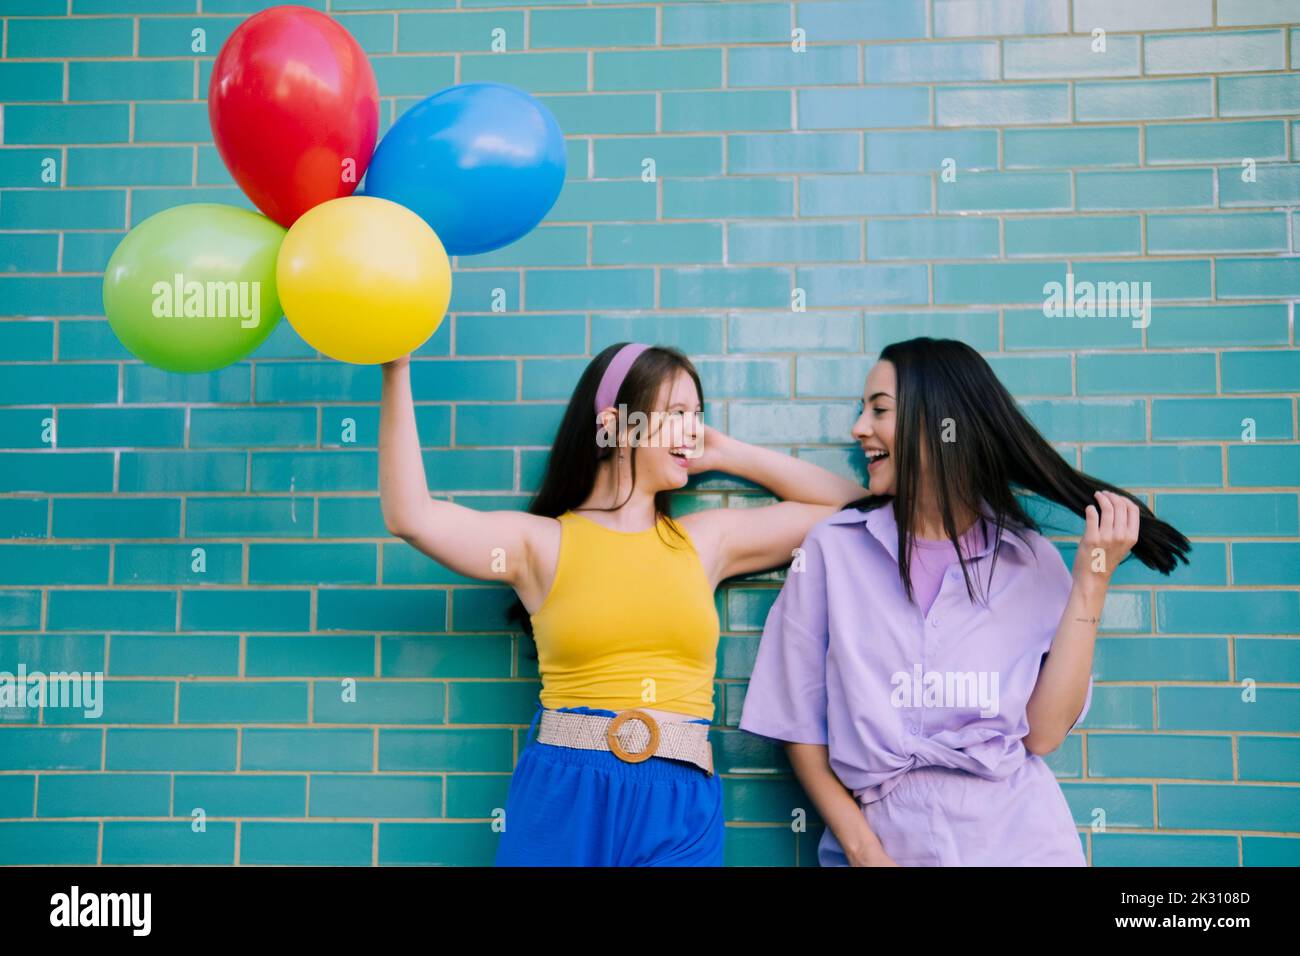 Woman holding multi colored balloons standing by friend with in front of wall Stock Photo